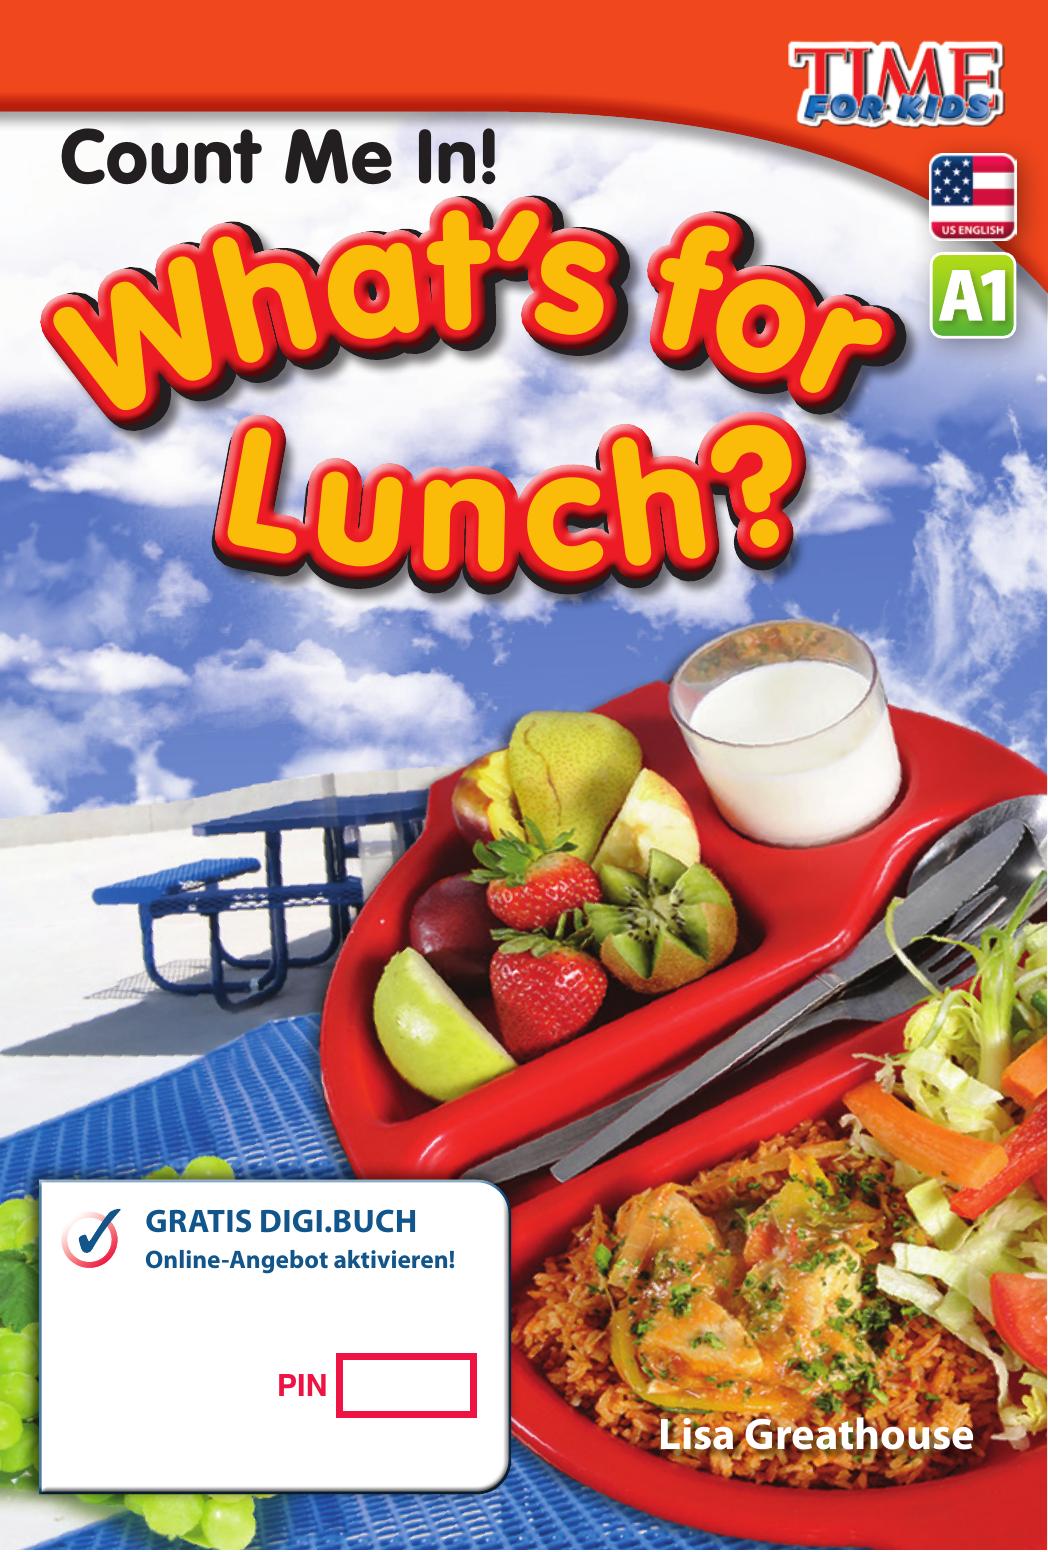 A1 – Count Me In! What’s for Lunch?